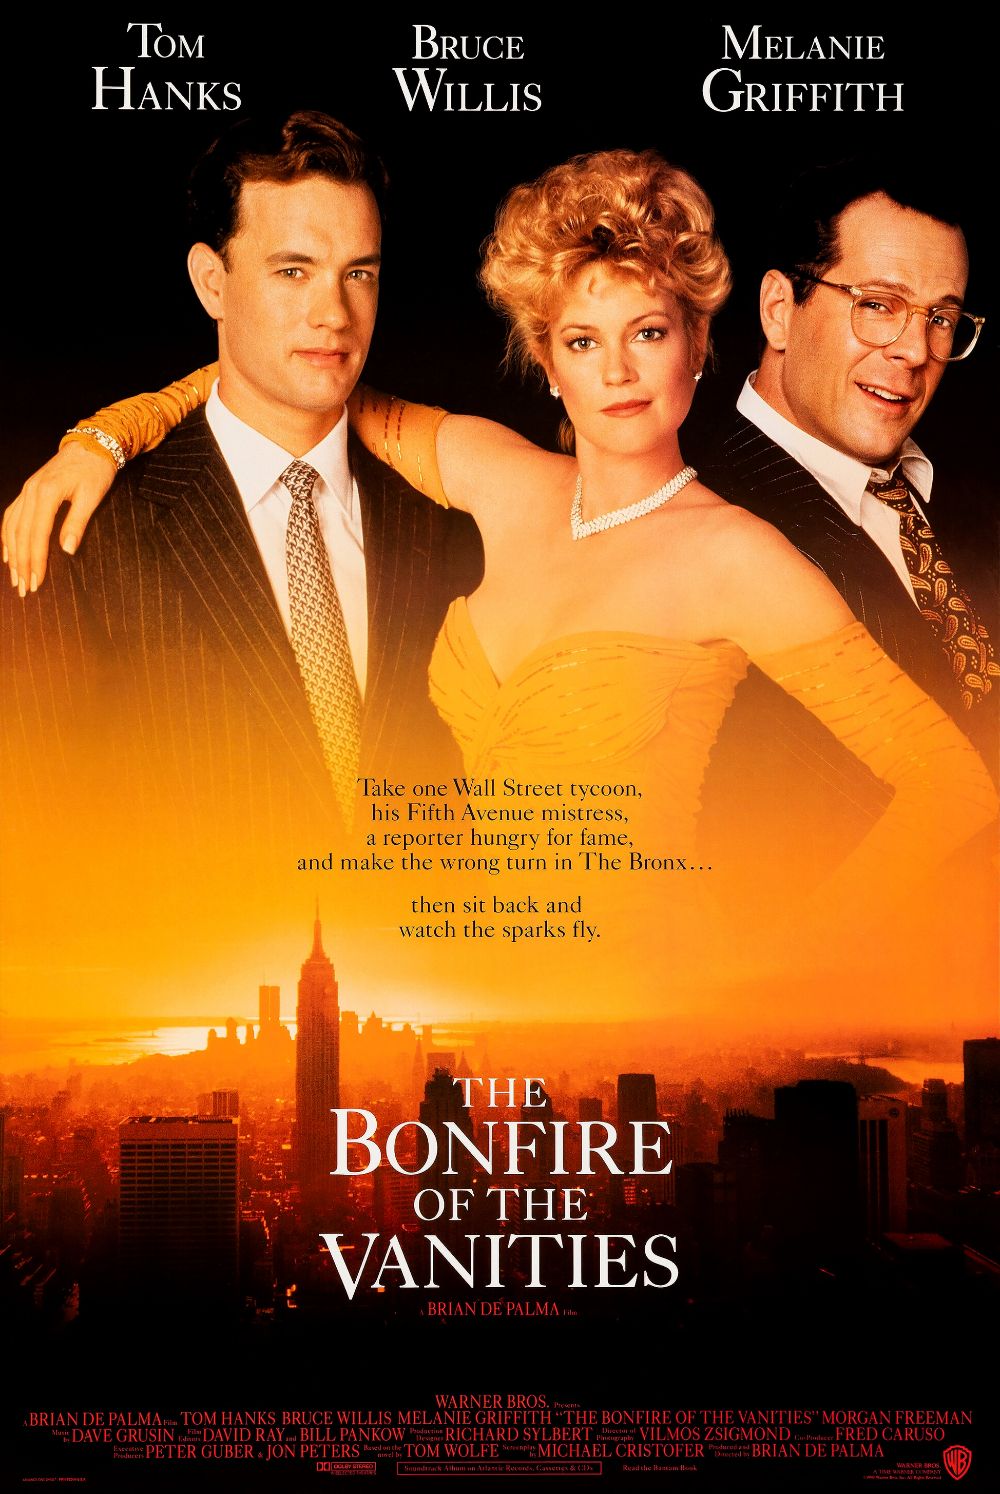 Bonfire of the Vanities poster with Tom Hanks and Melanie Griffith and Bruce Willis